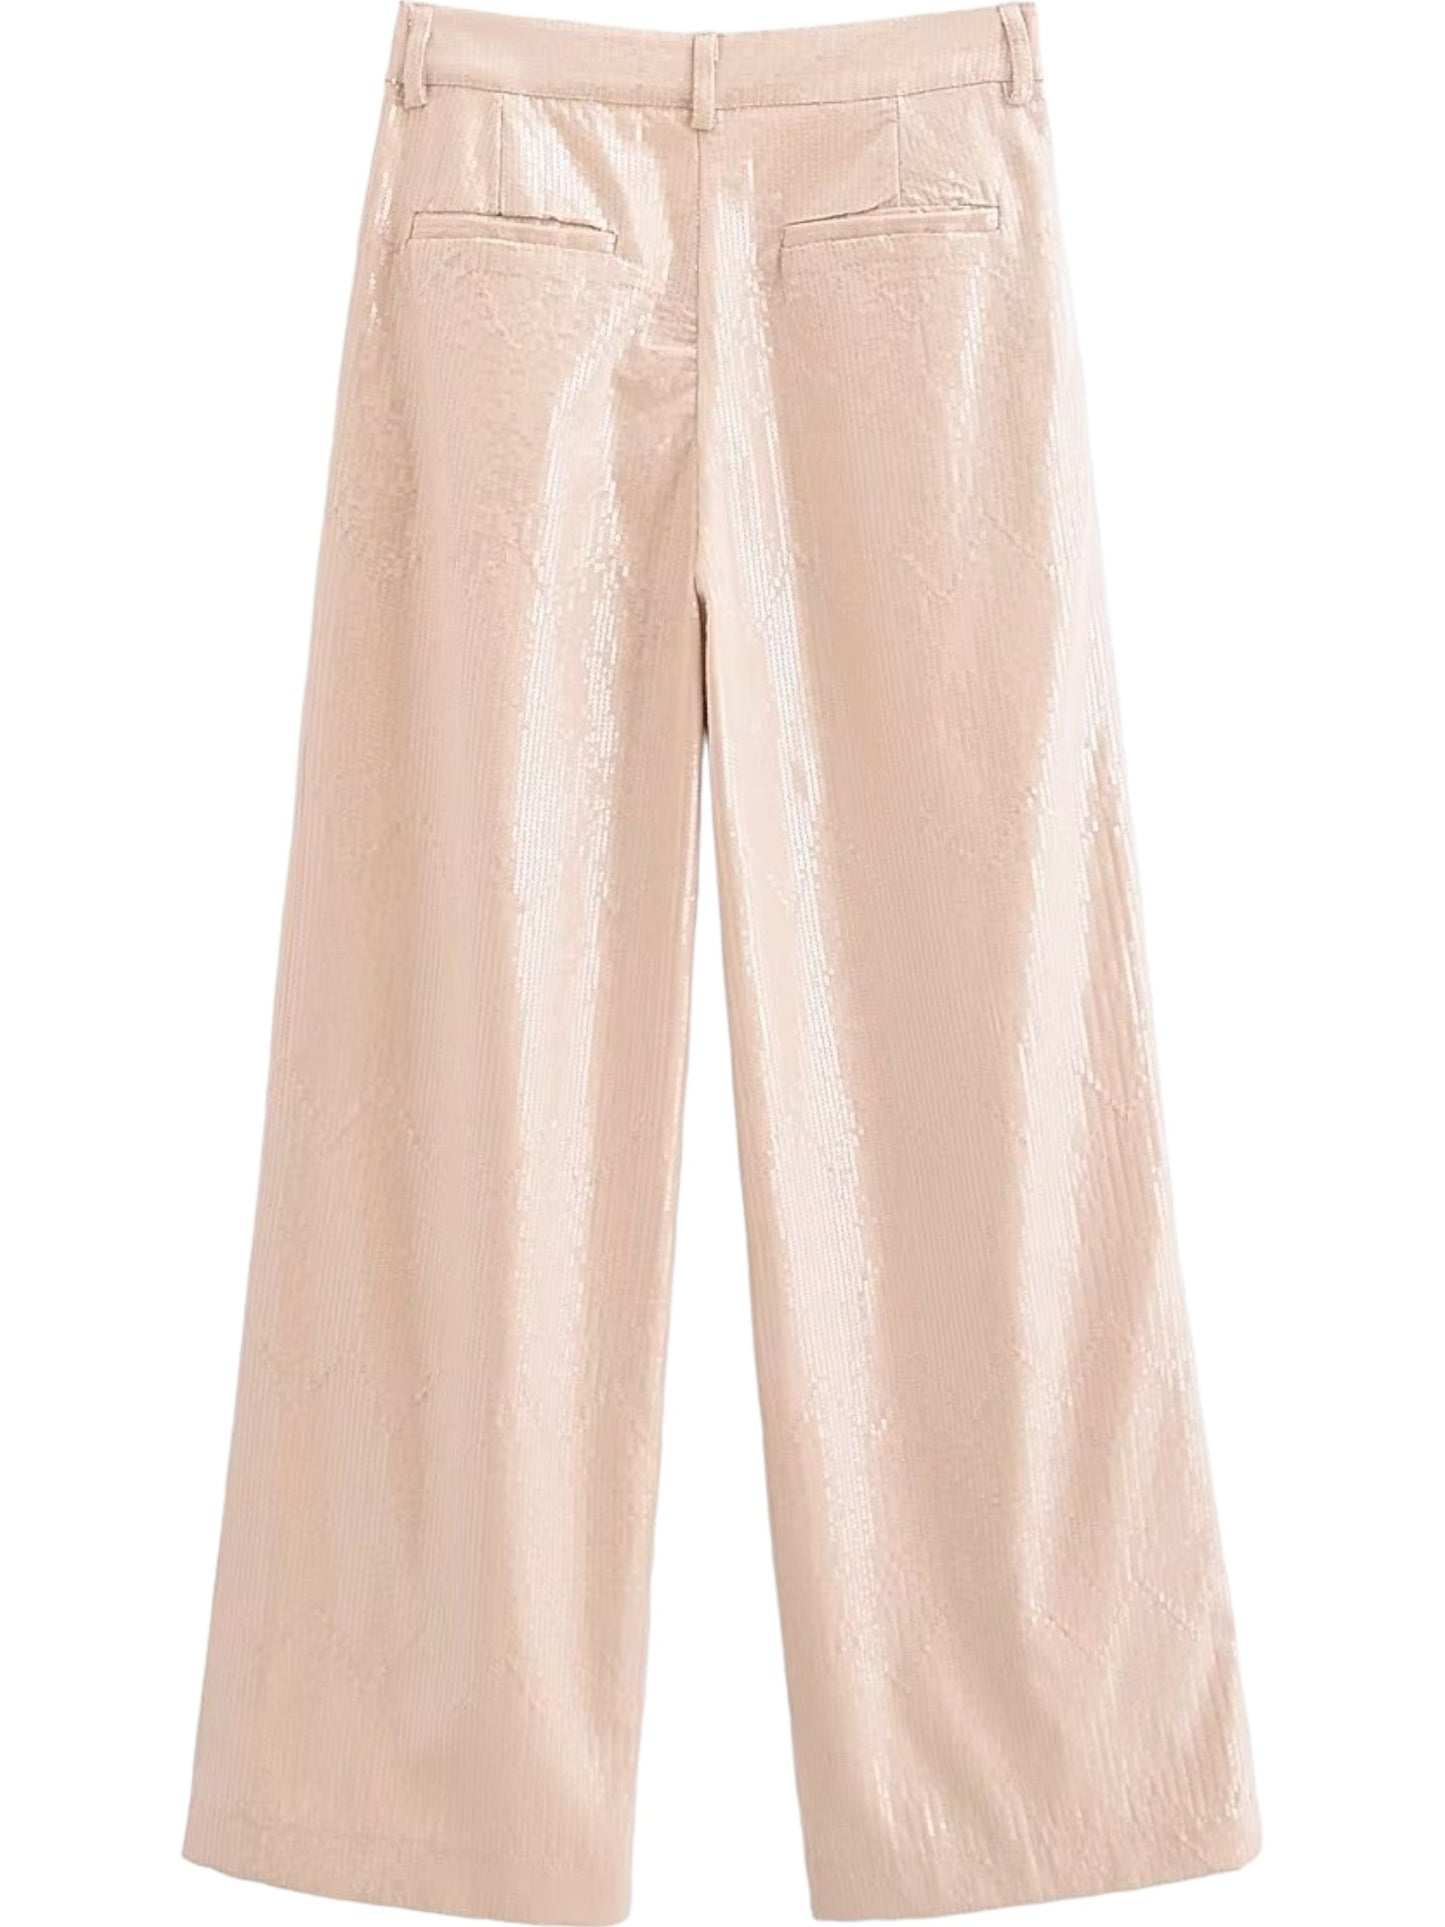 Blush Pink Sequin Tailored Pleated Straight Leg Pants